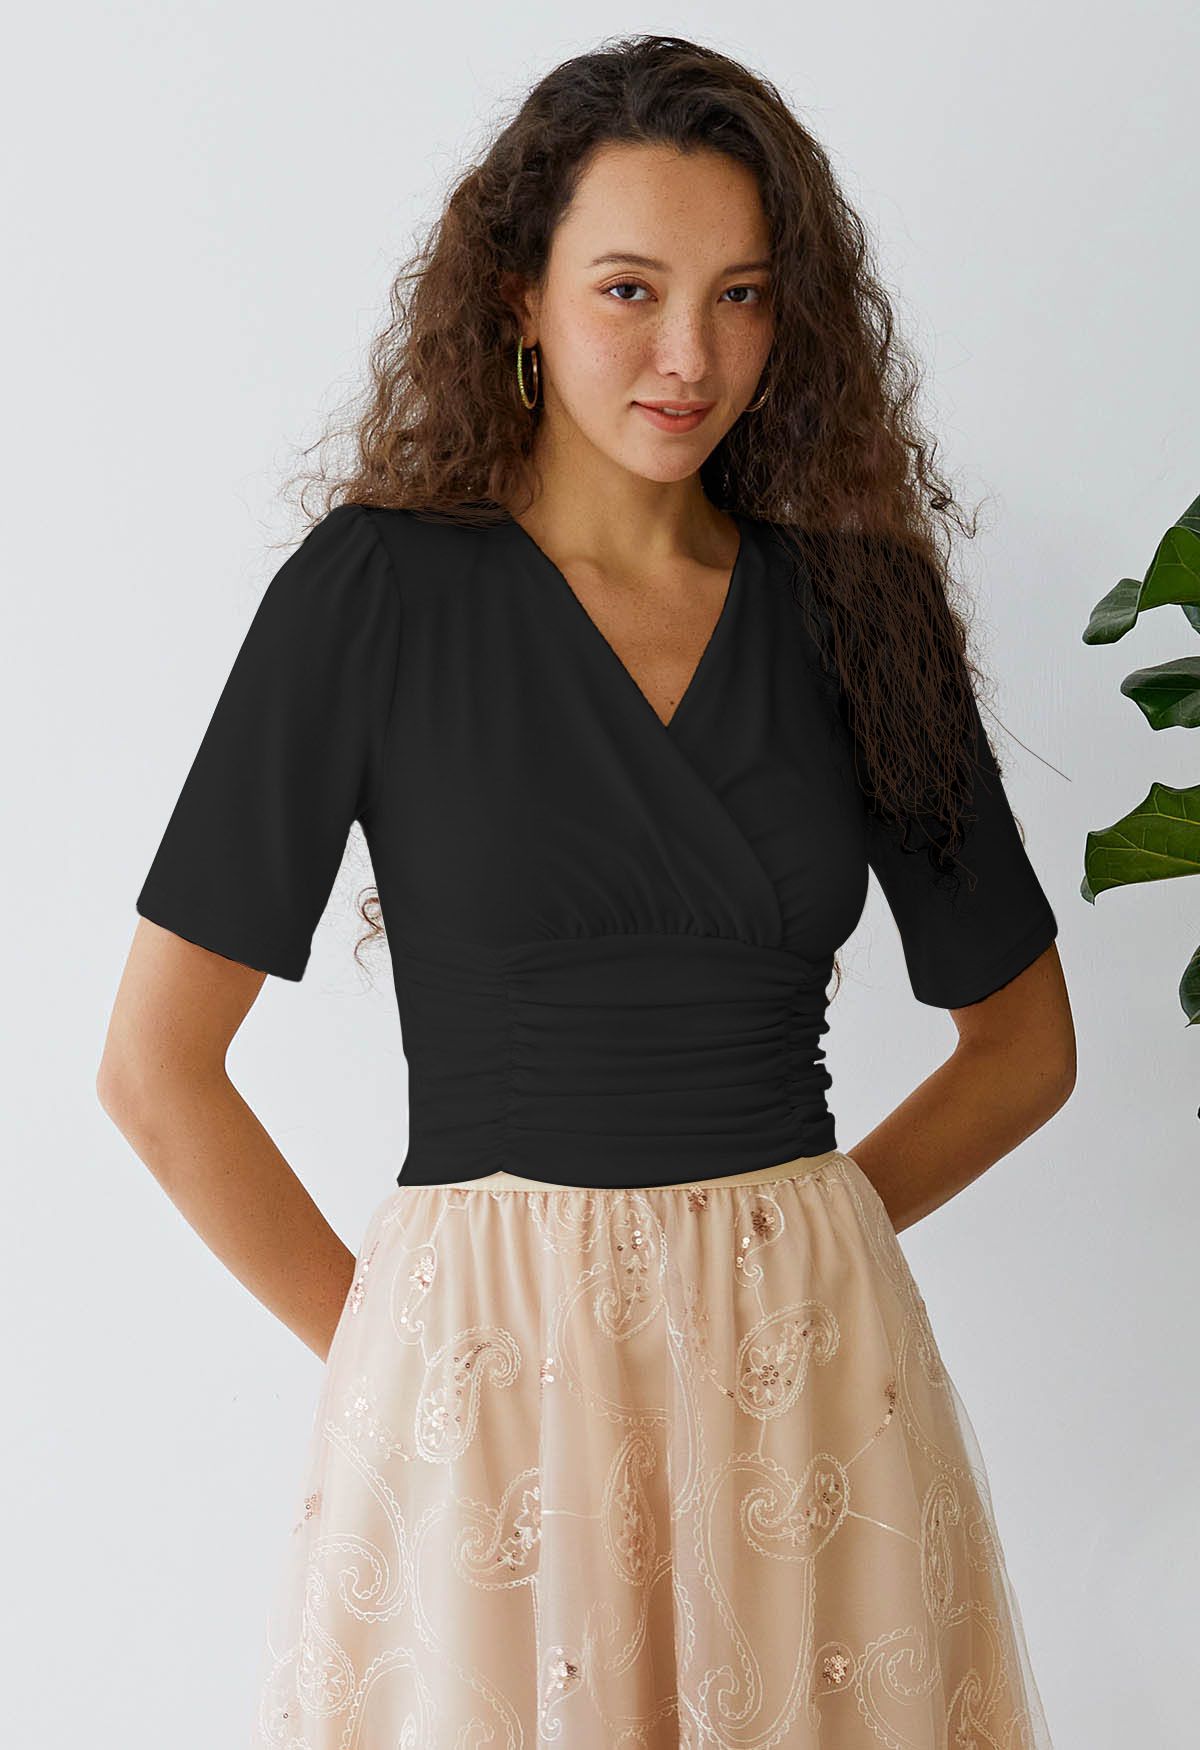 Short Sleeve Ruched Lace Top Black